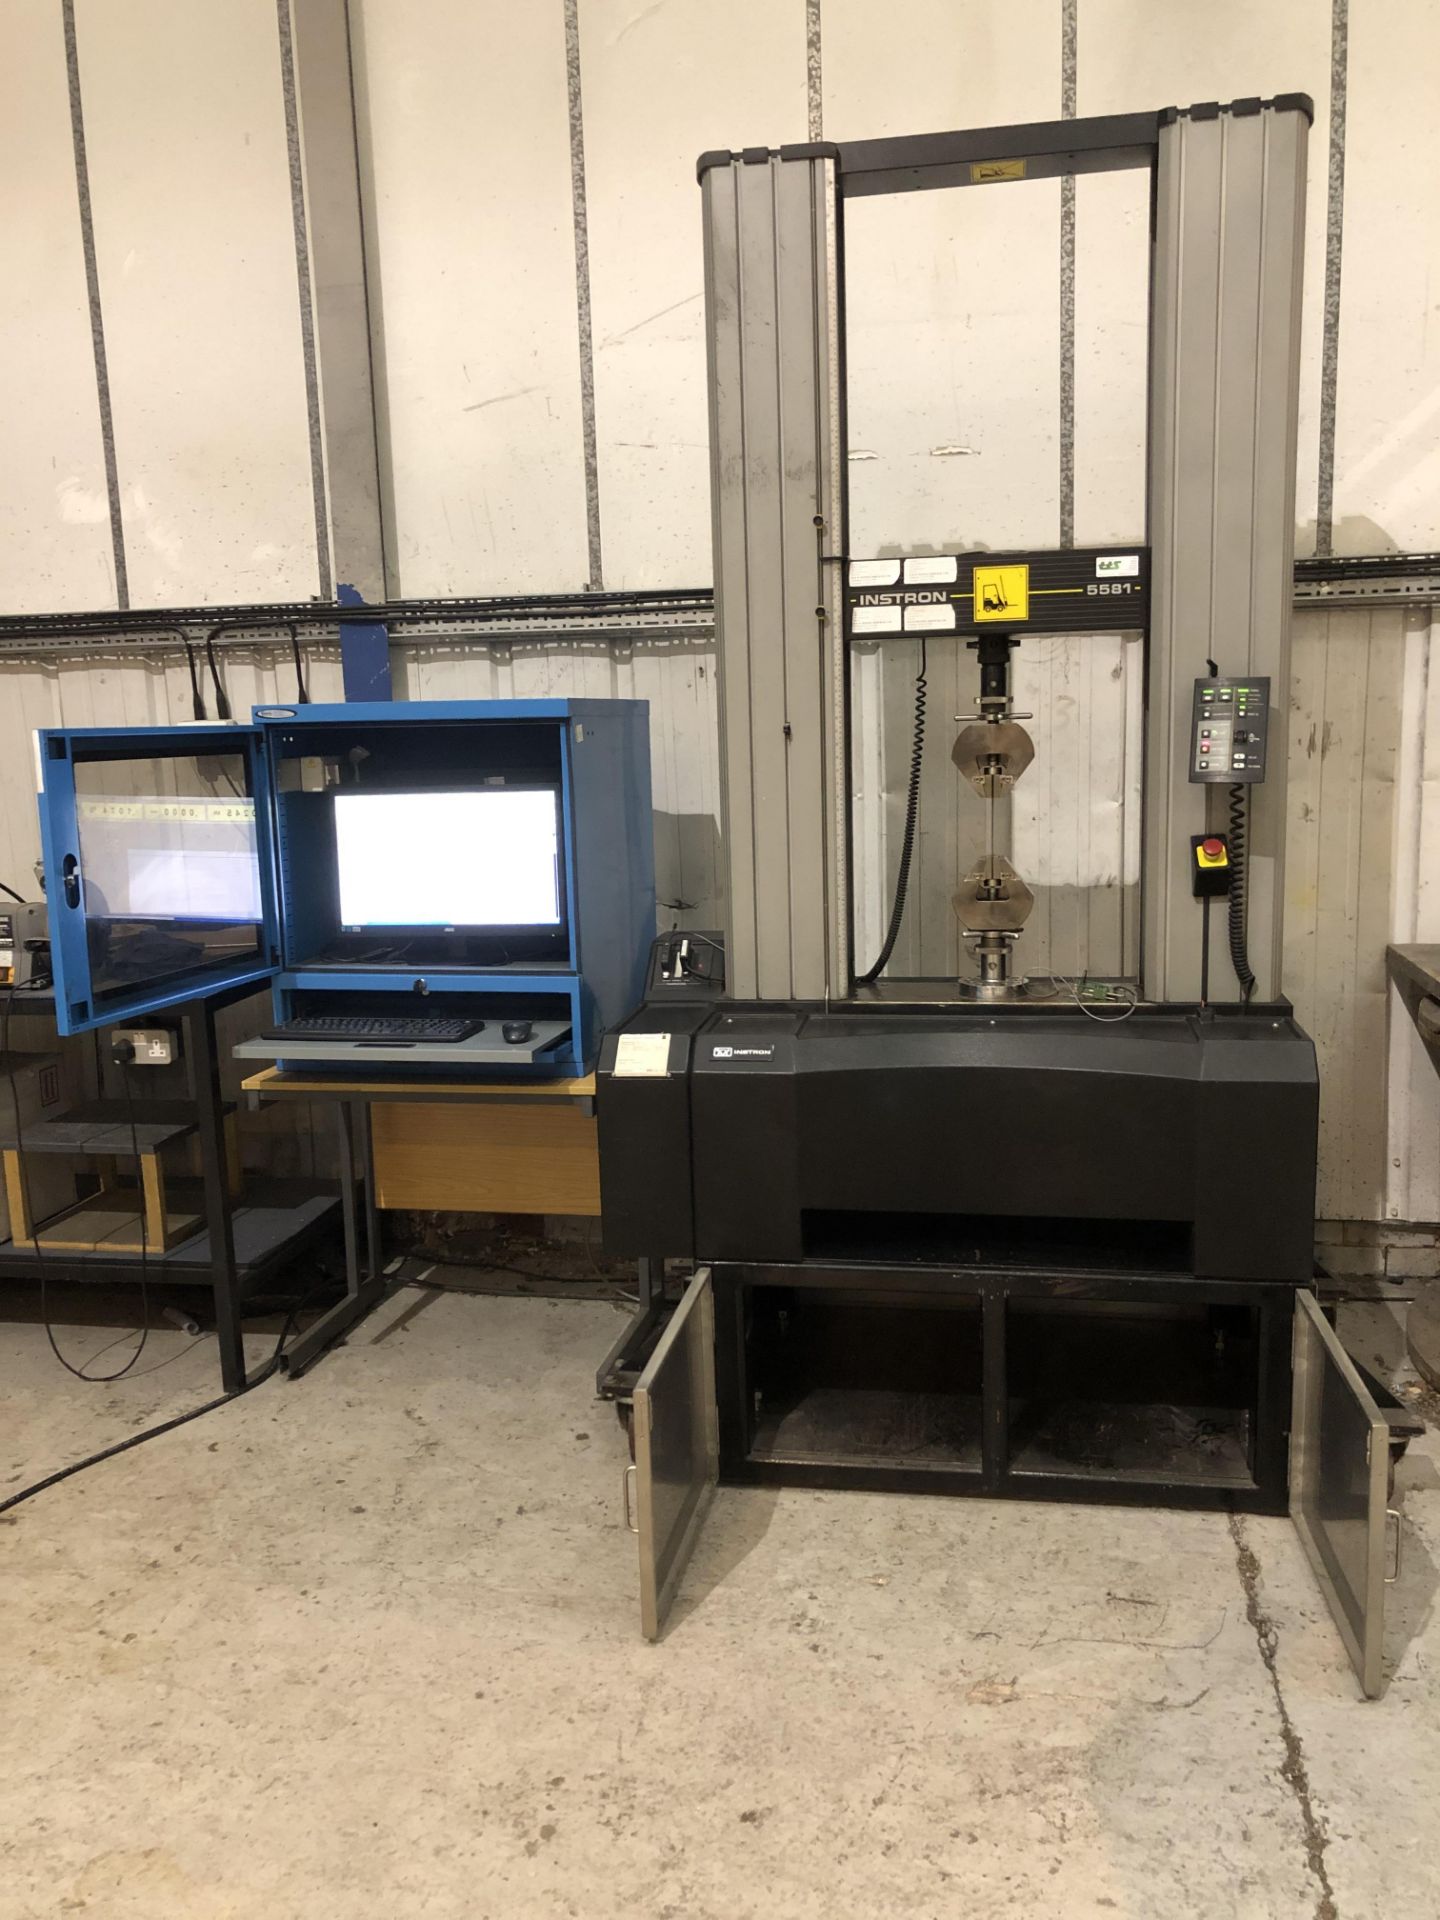 Instron 8851 50kN Mechanical Testing Machine - Image 11 of 11